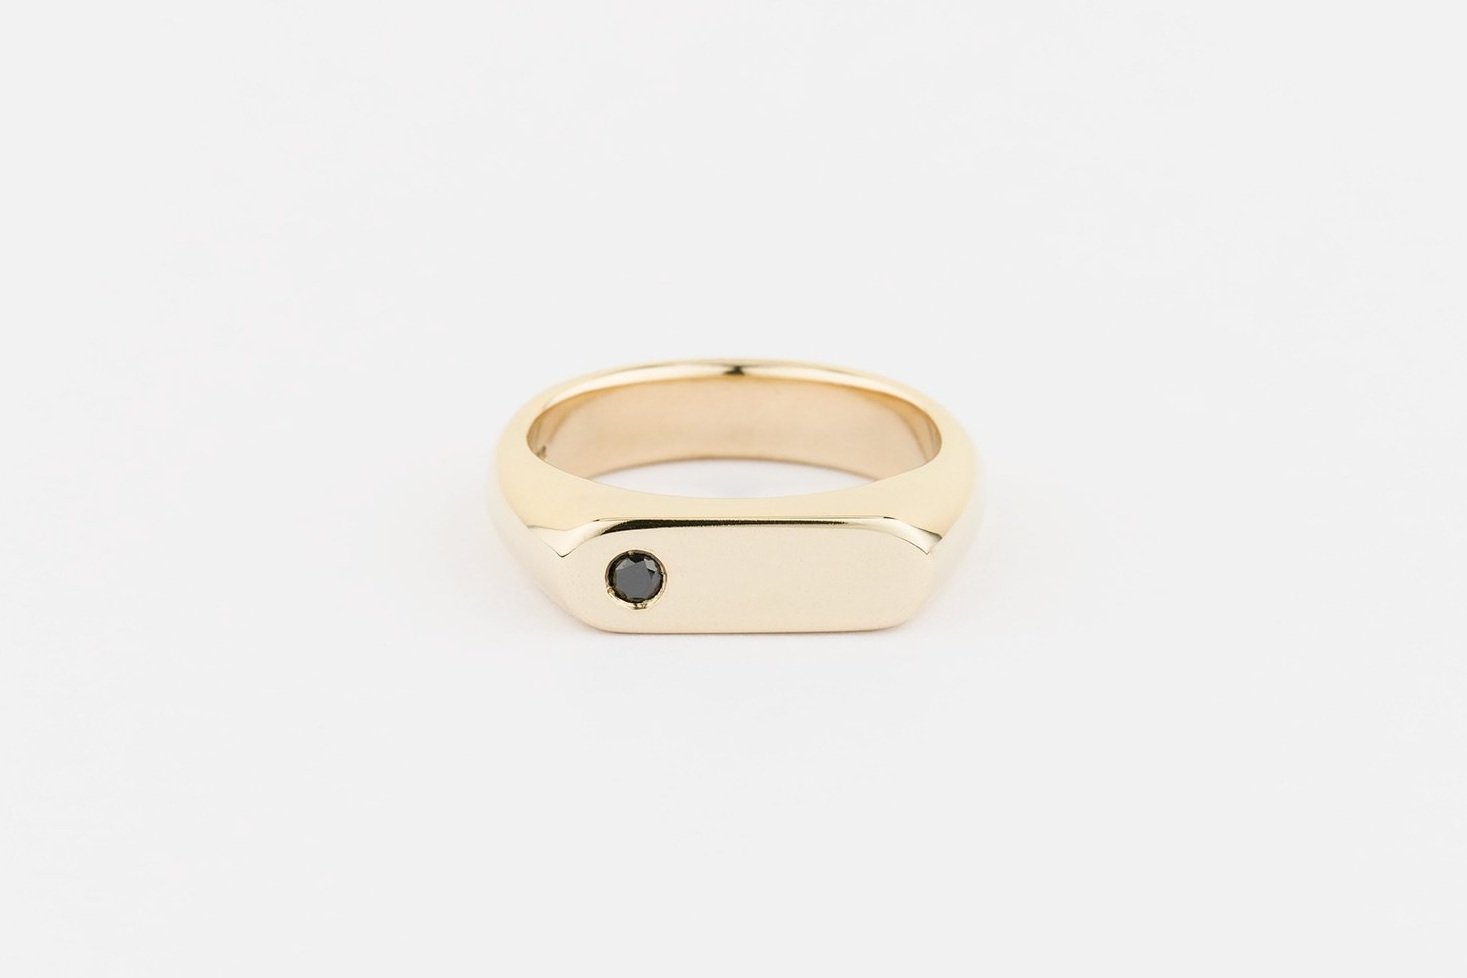  Recycled 9ct yellow gold pill signet ring set with a black diamond 